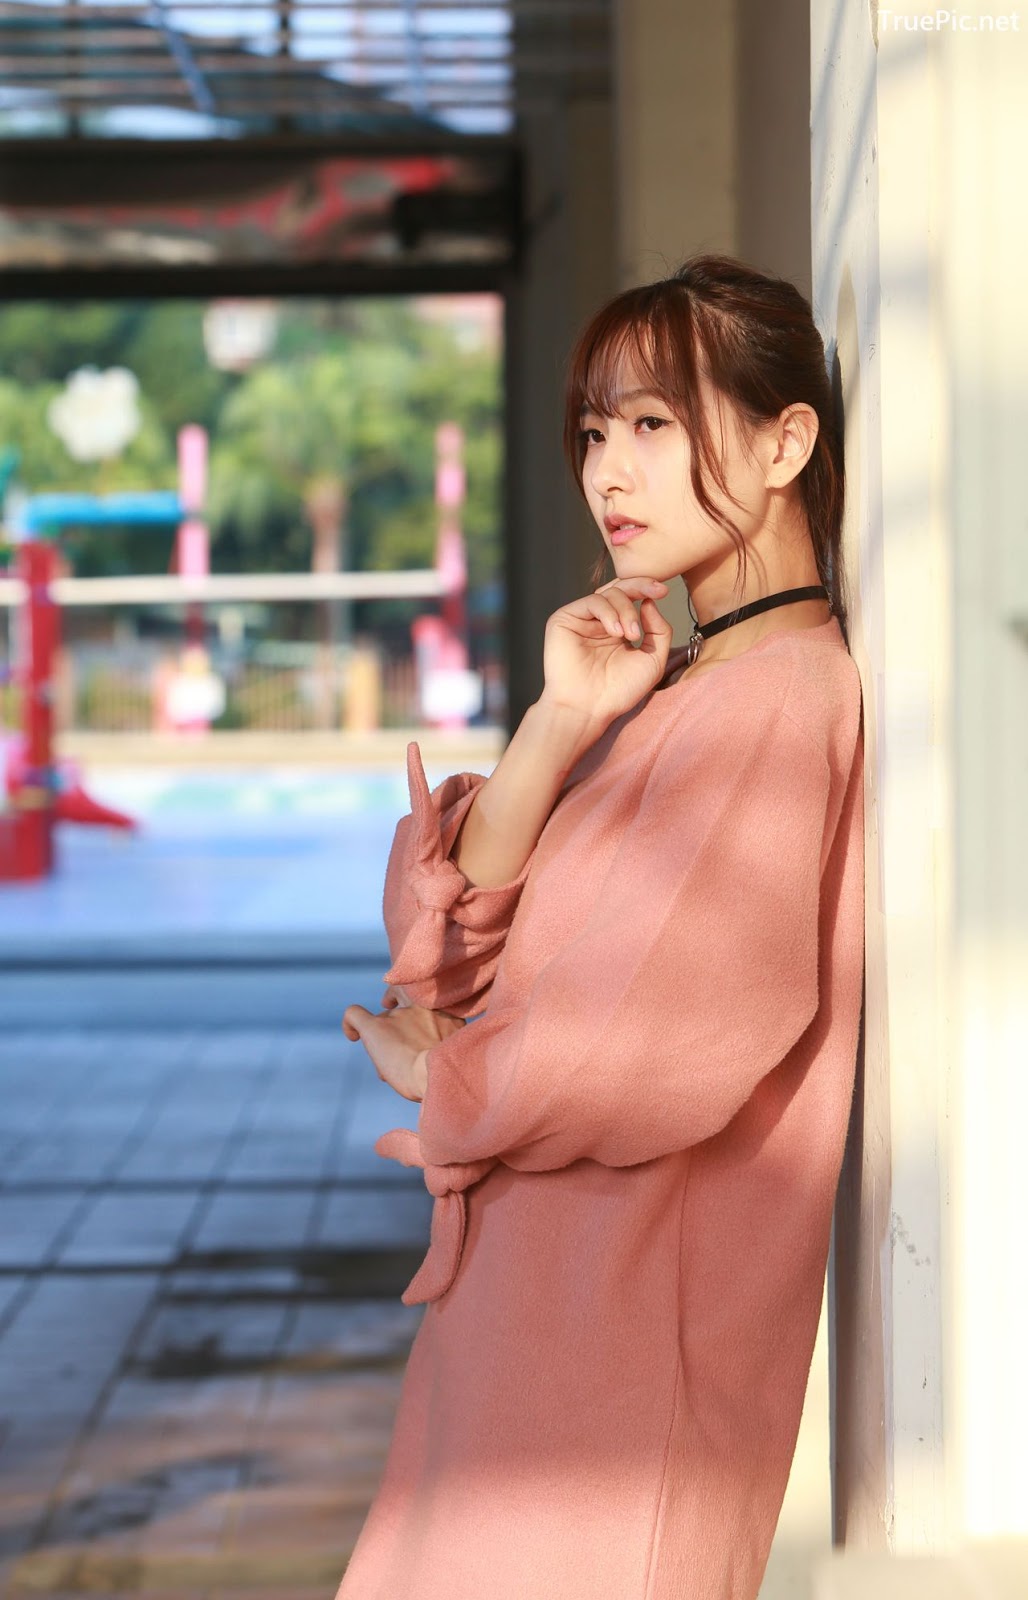 Image-Taiwanese-Model-郭思敏-Pure-And-Gorgeous-Girl-In-Pink-Sweater-Dress-TruePic.net- Picture-54